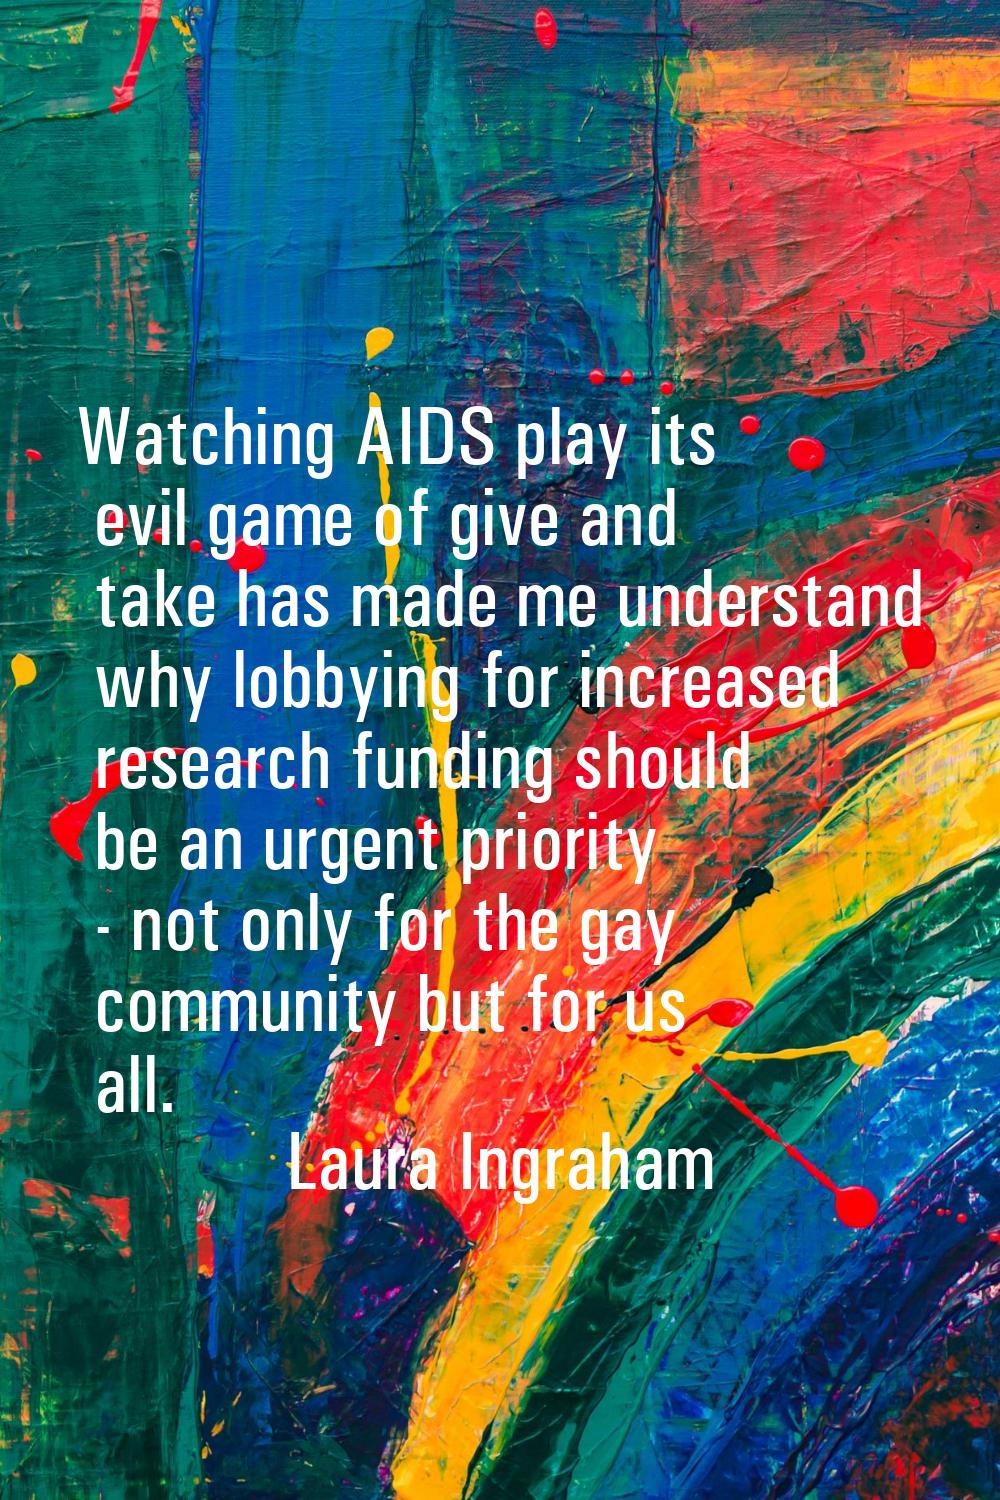 Watching AIDS play its evil game of give and take has made me understand why lobbying for increased